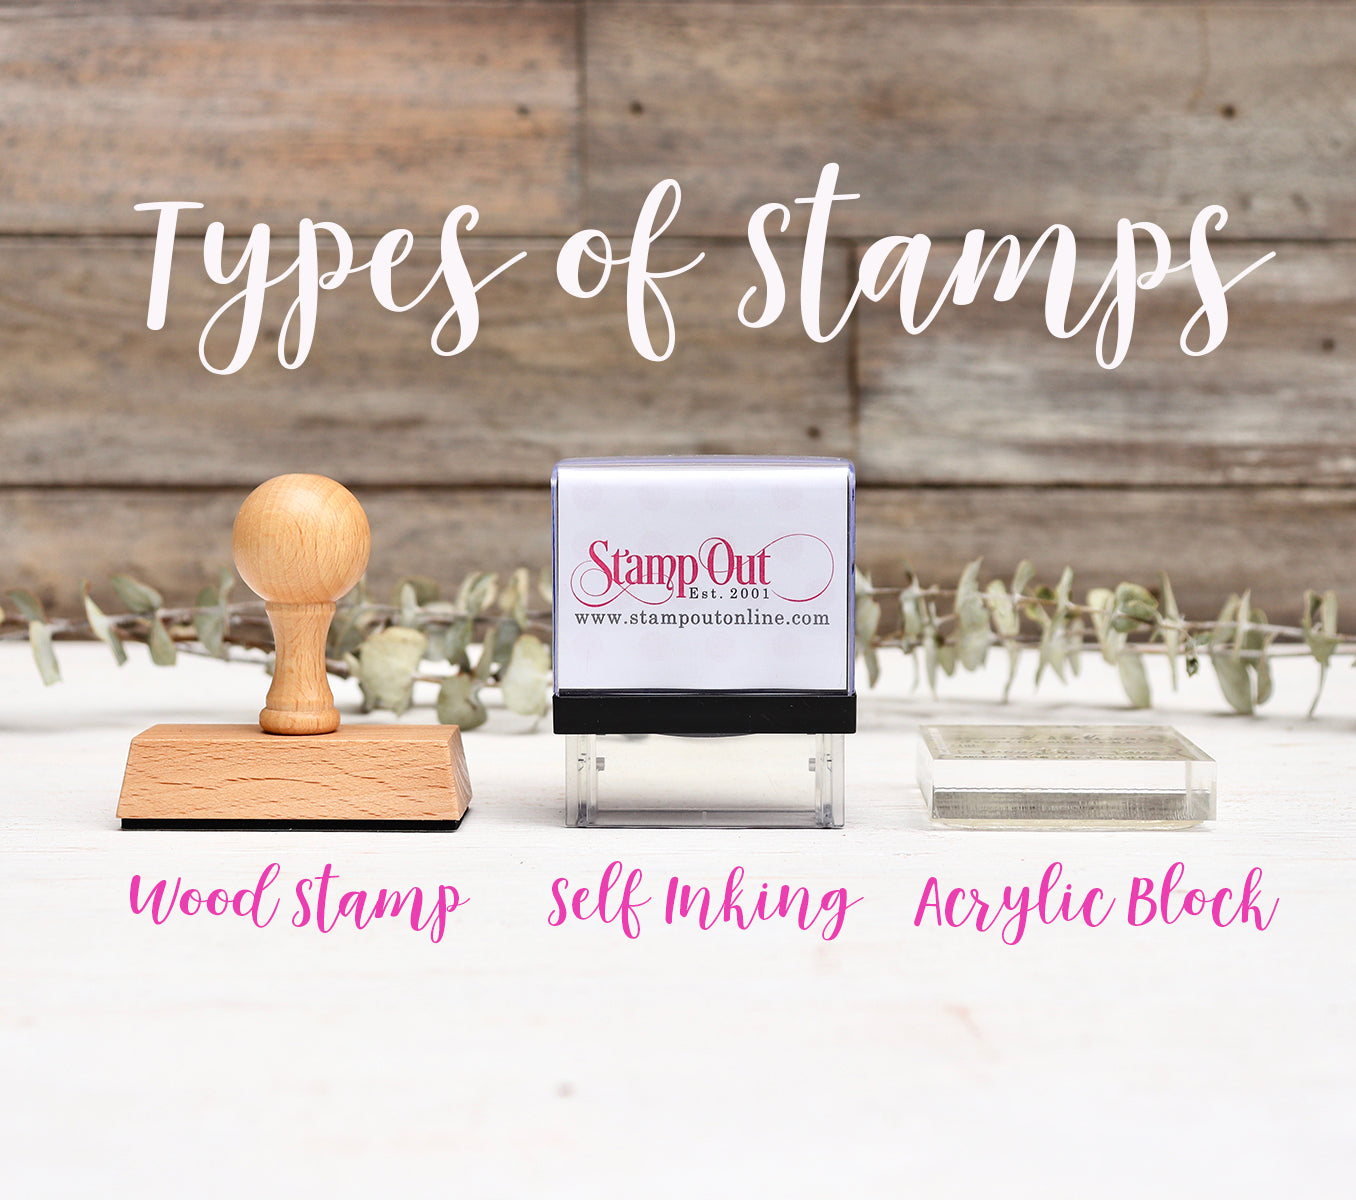 personalized stamps